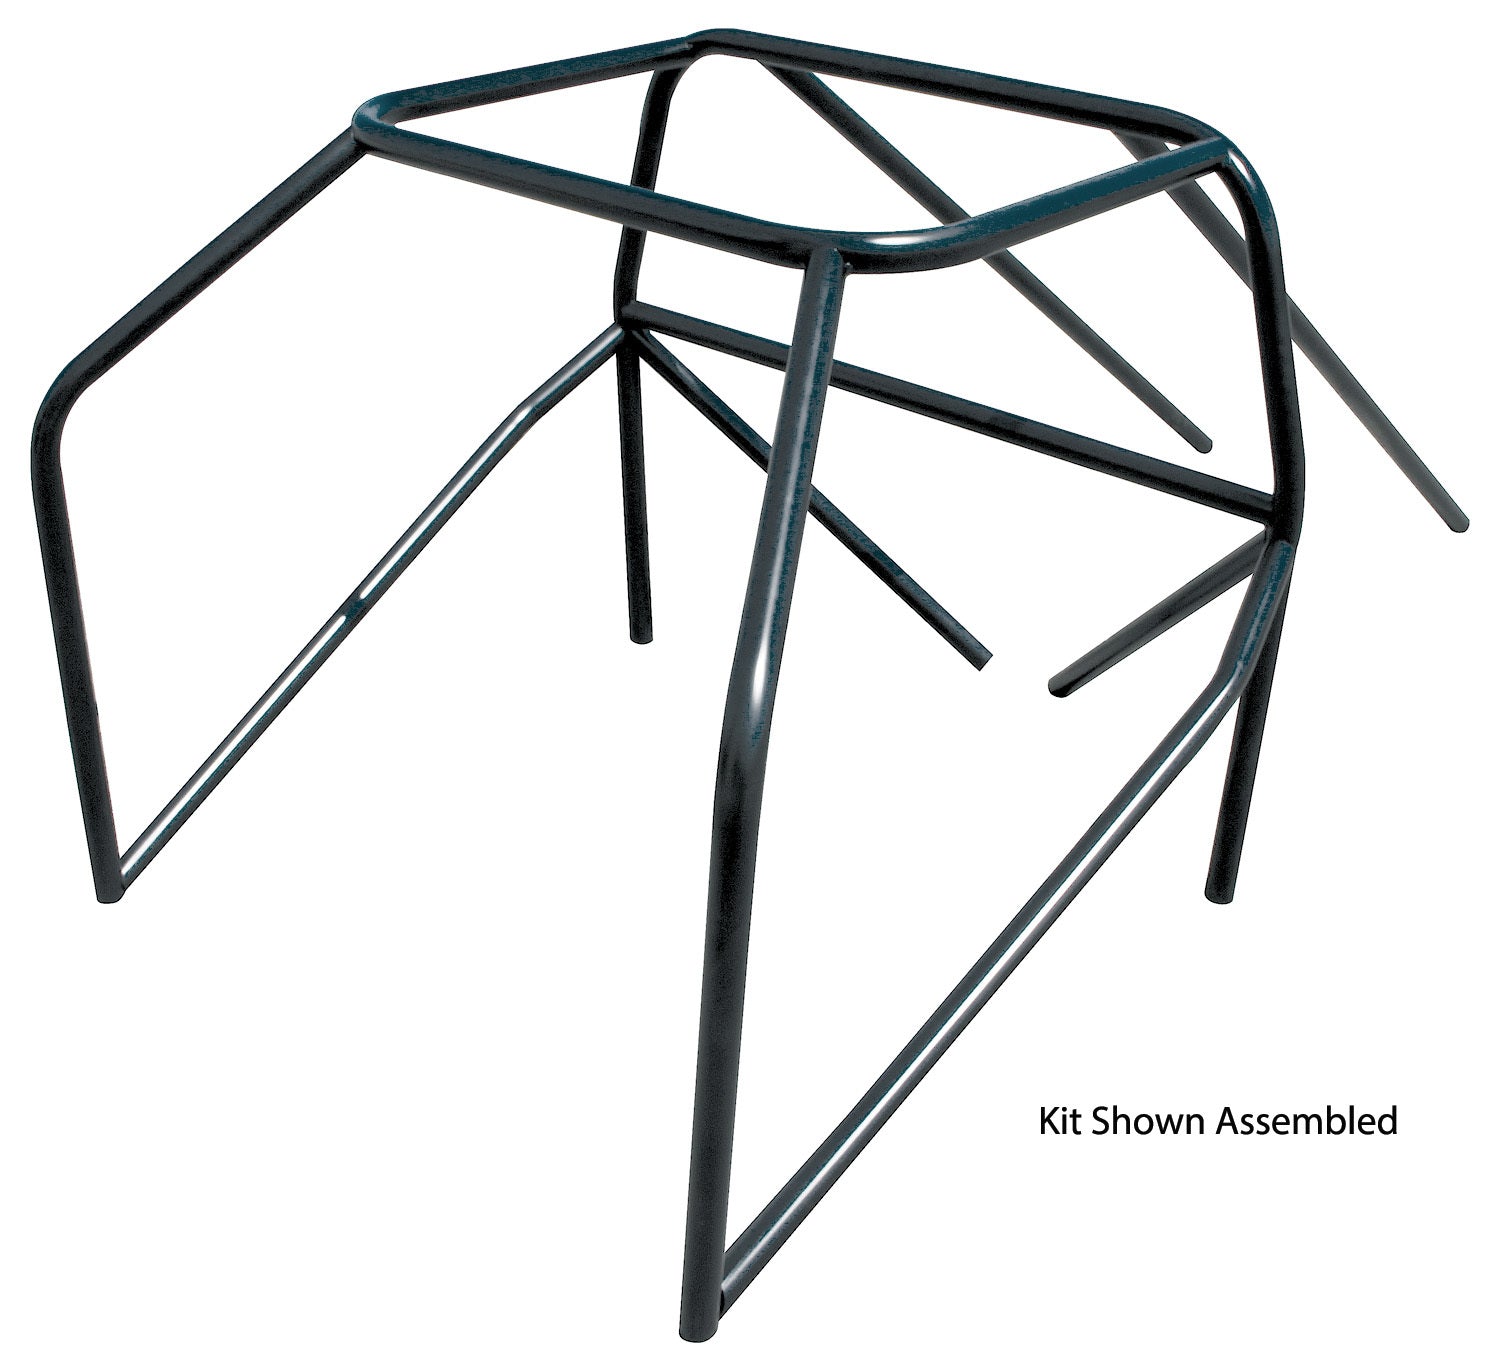 10pt Roll Cage Kit for 1978-88 G-Body